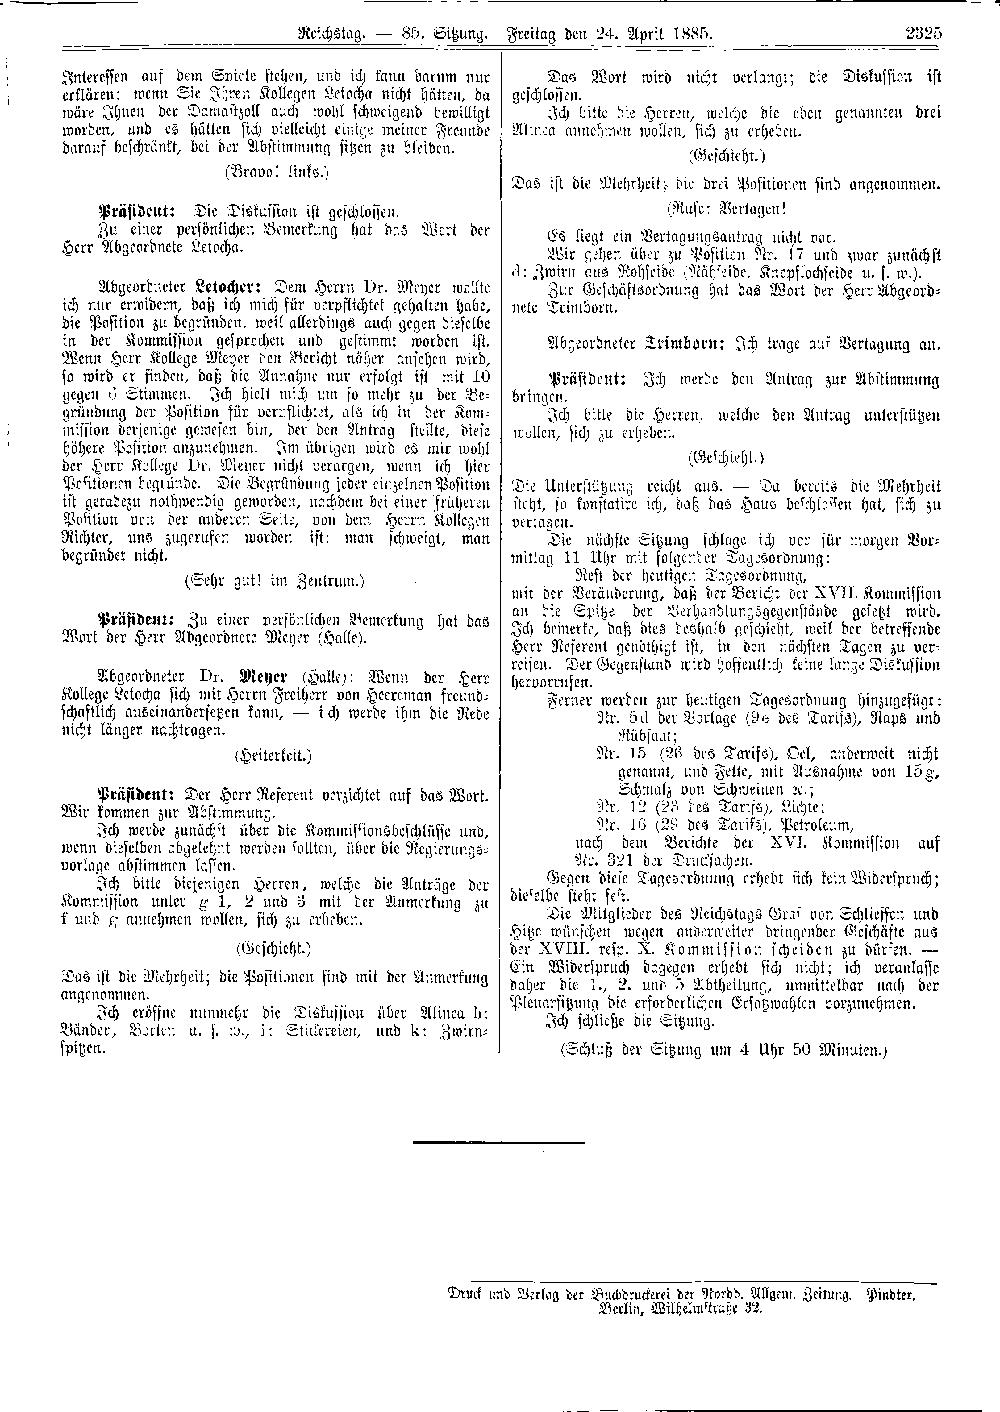 Scan of page 2325